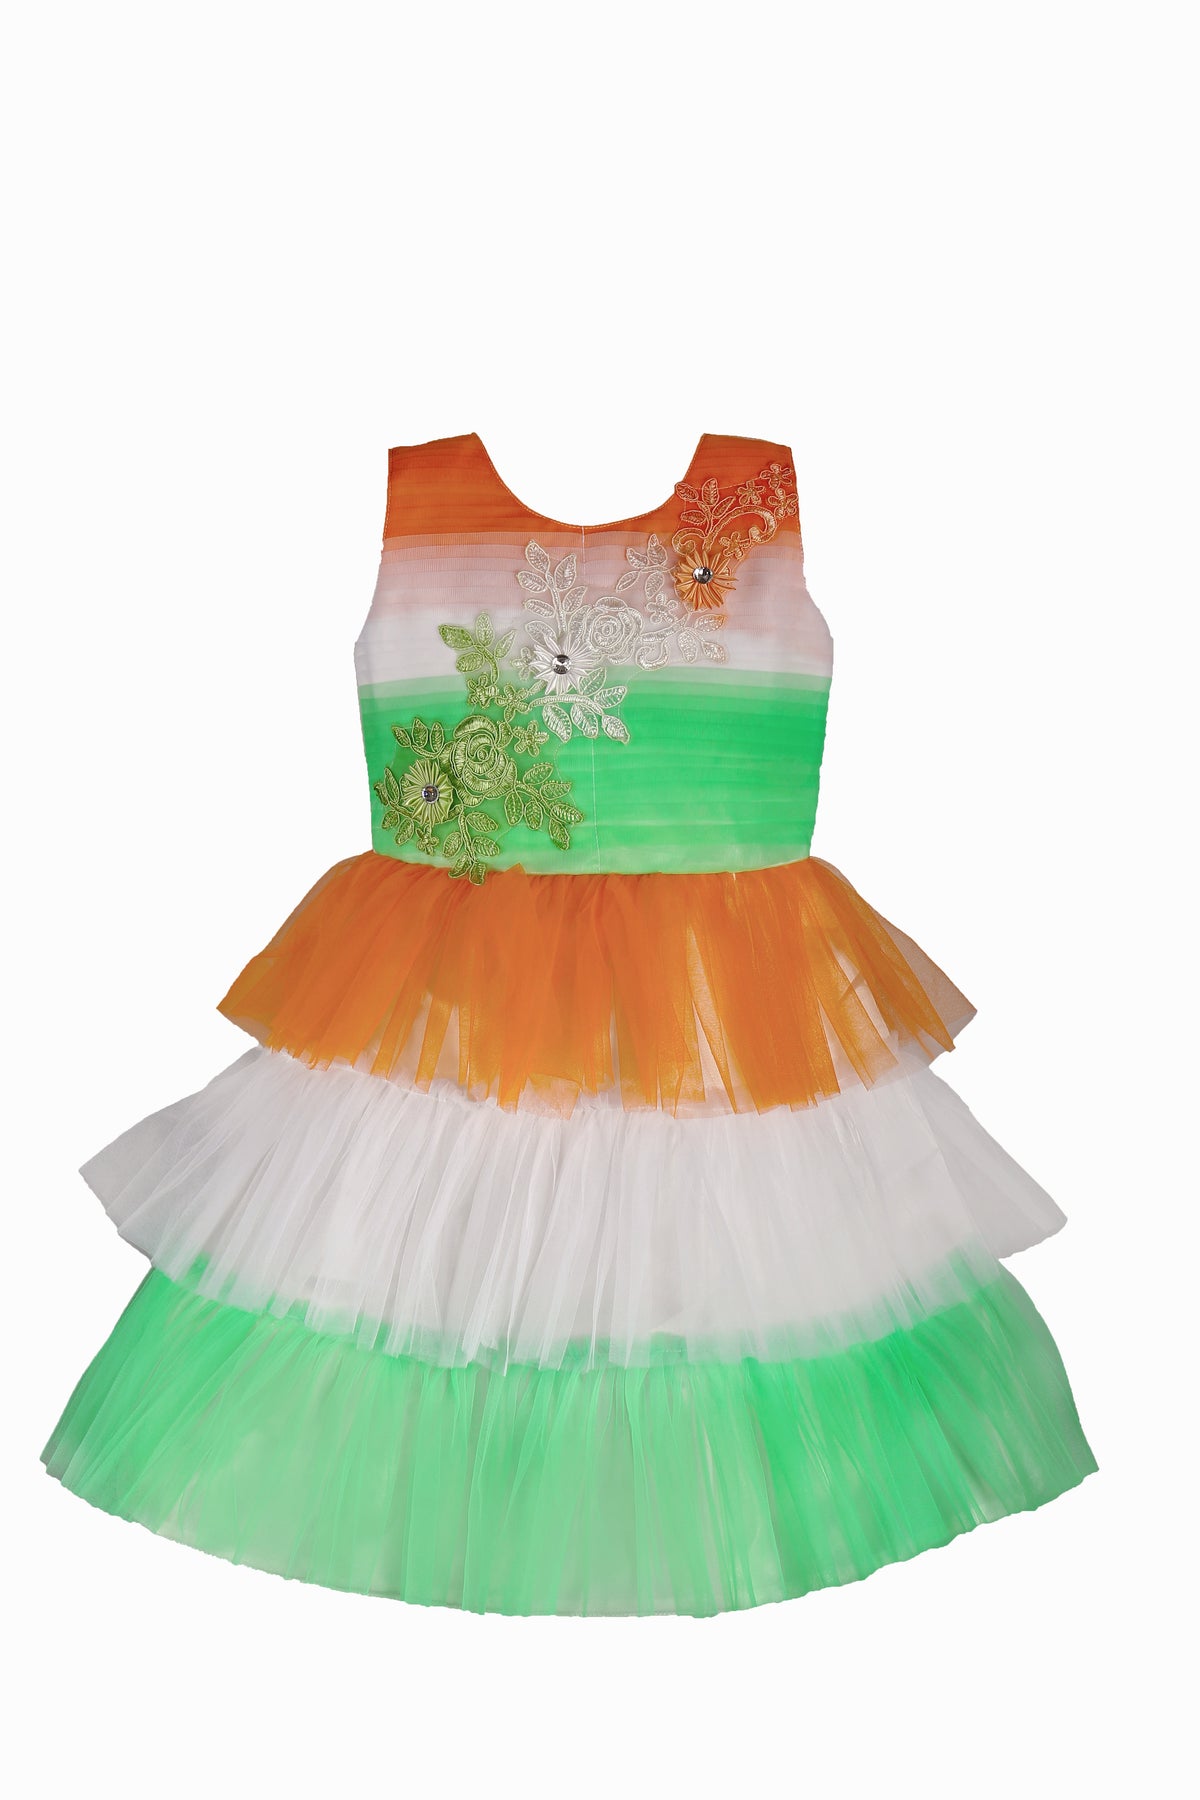 Independance Day Dress for Girls